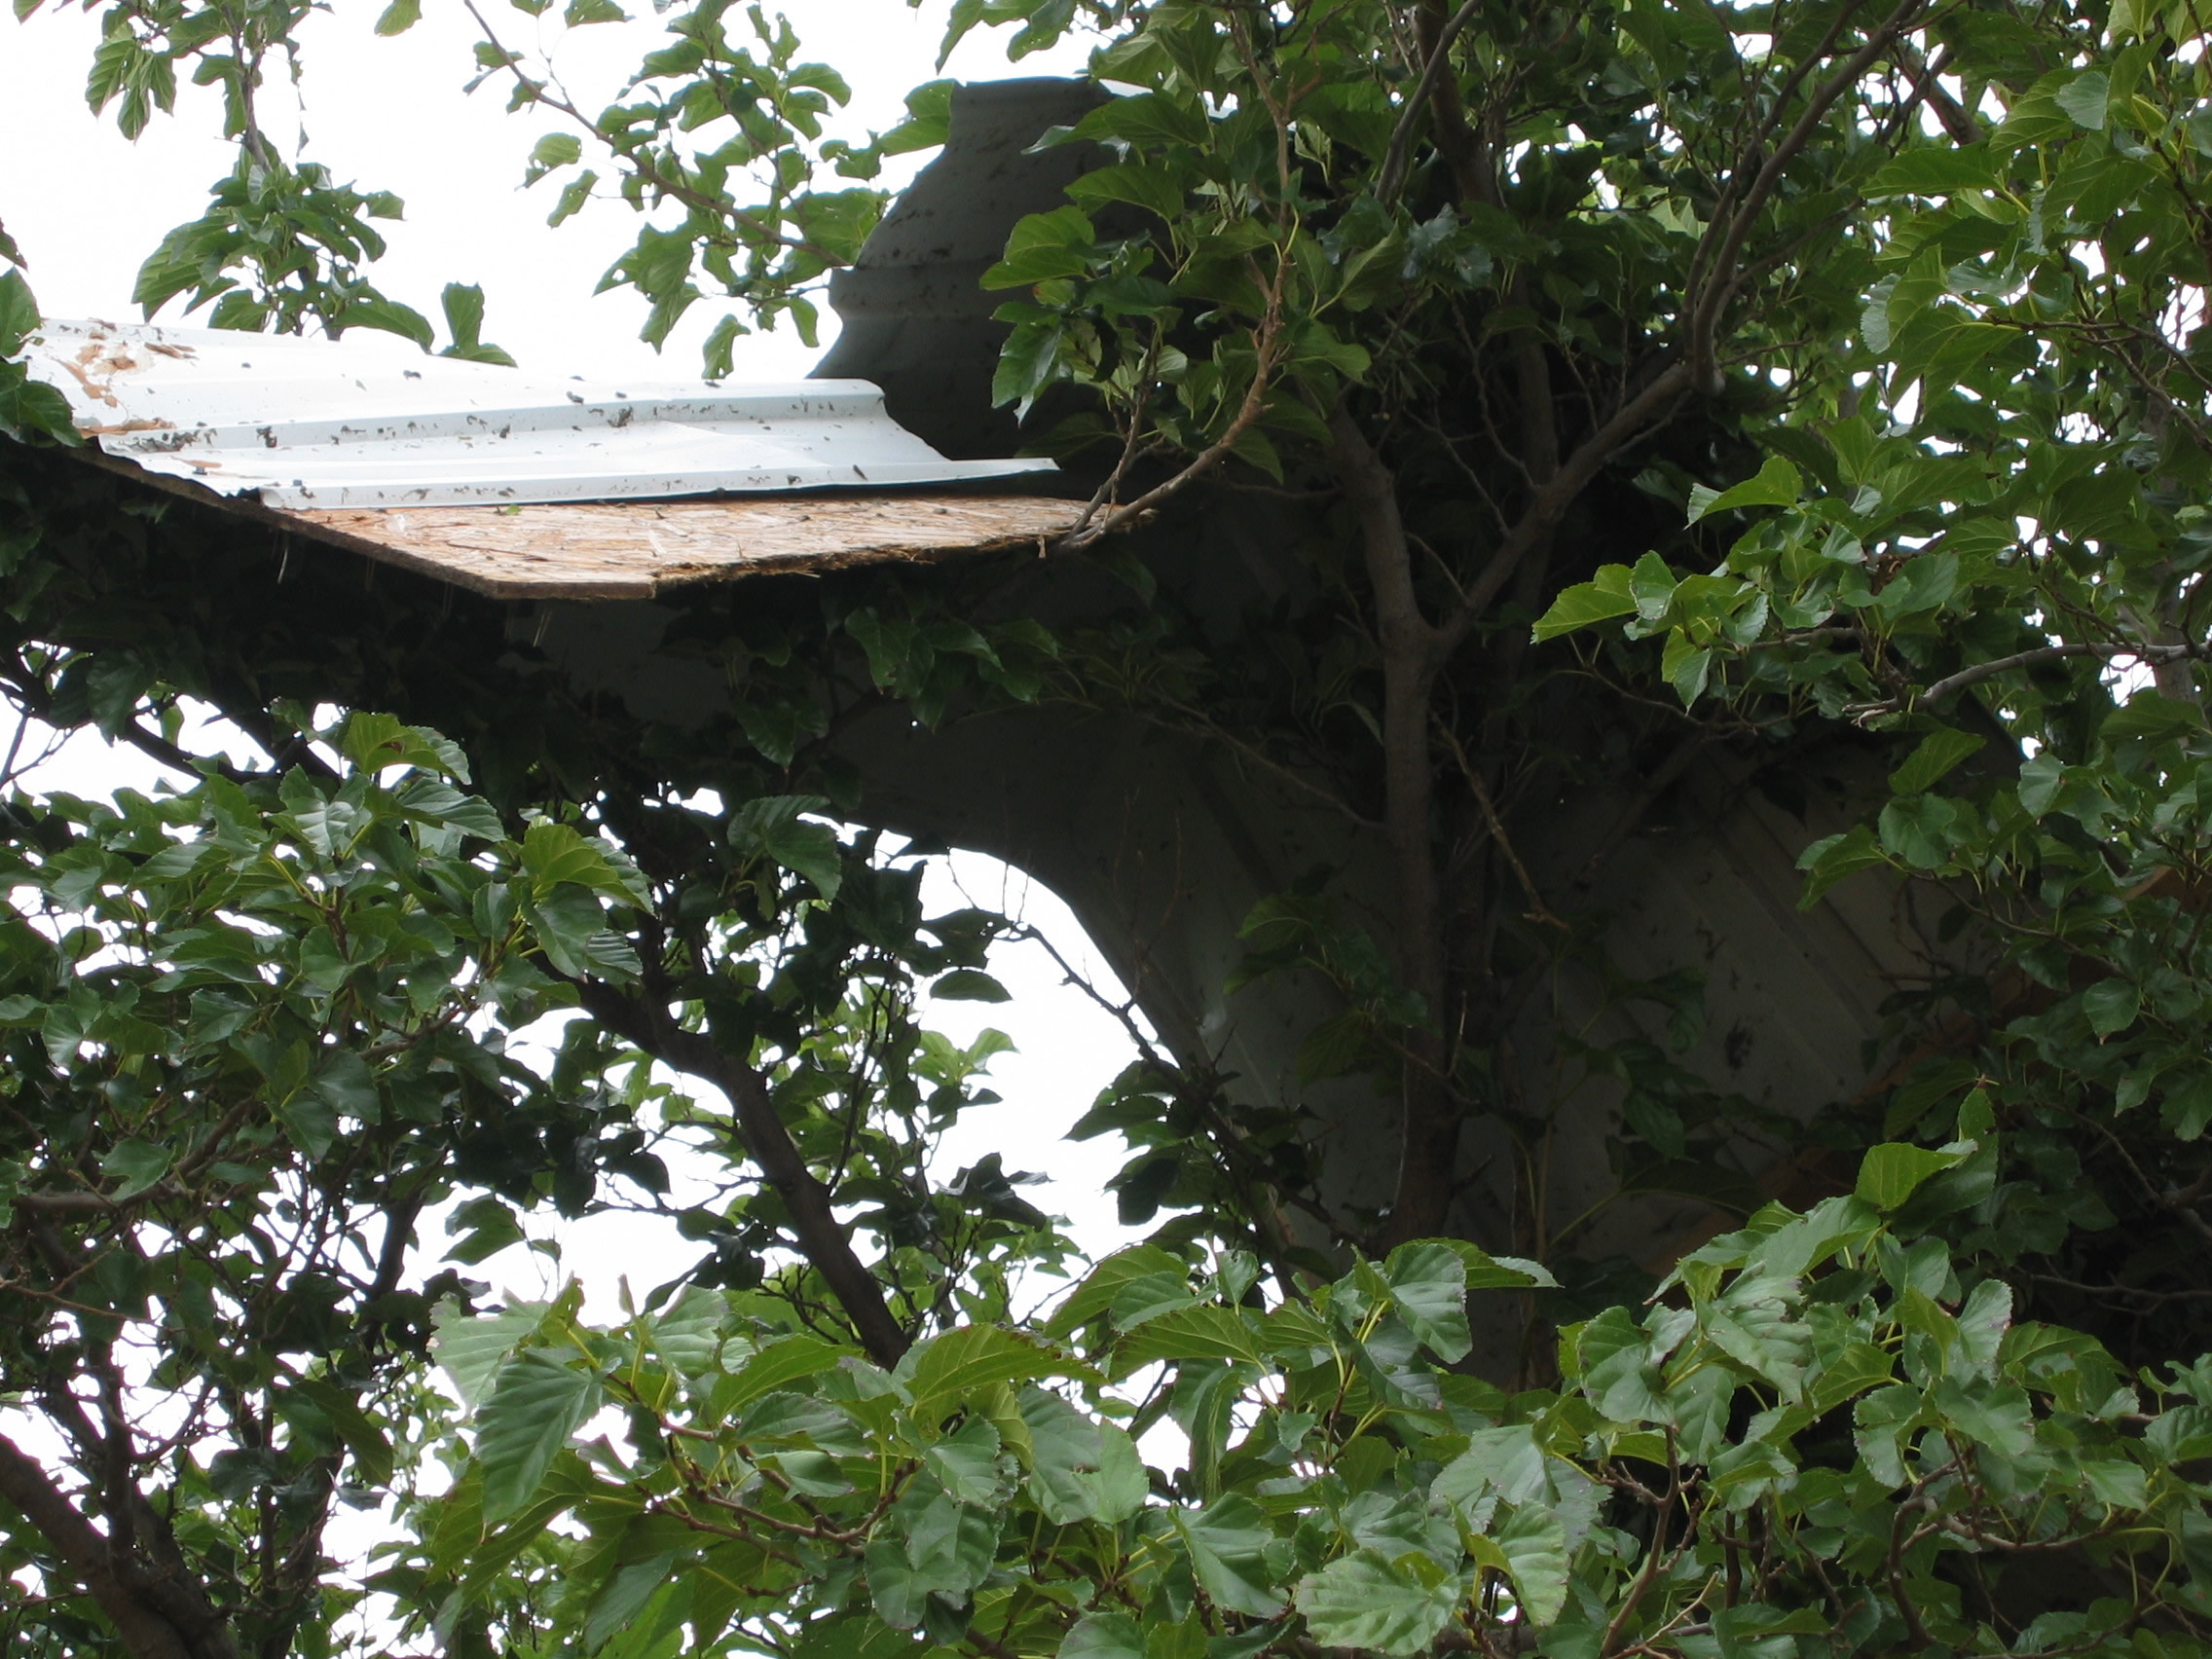 Photo of roofing material from first house resting in a tree by the undamaged house.